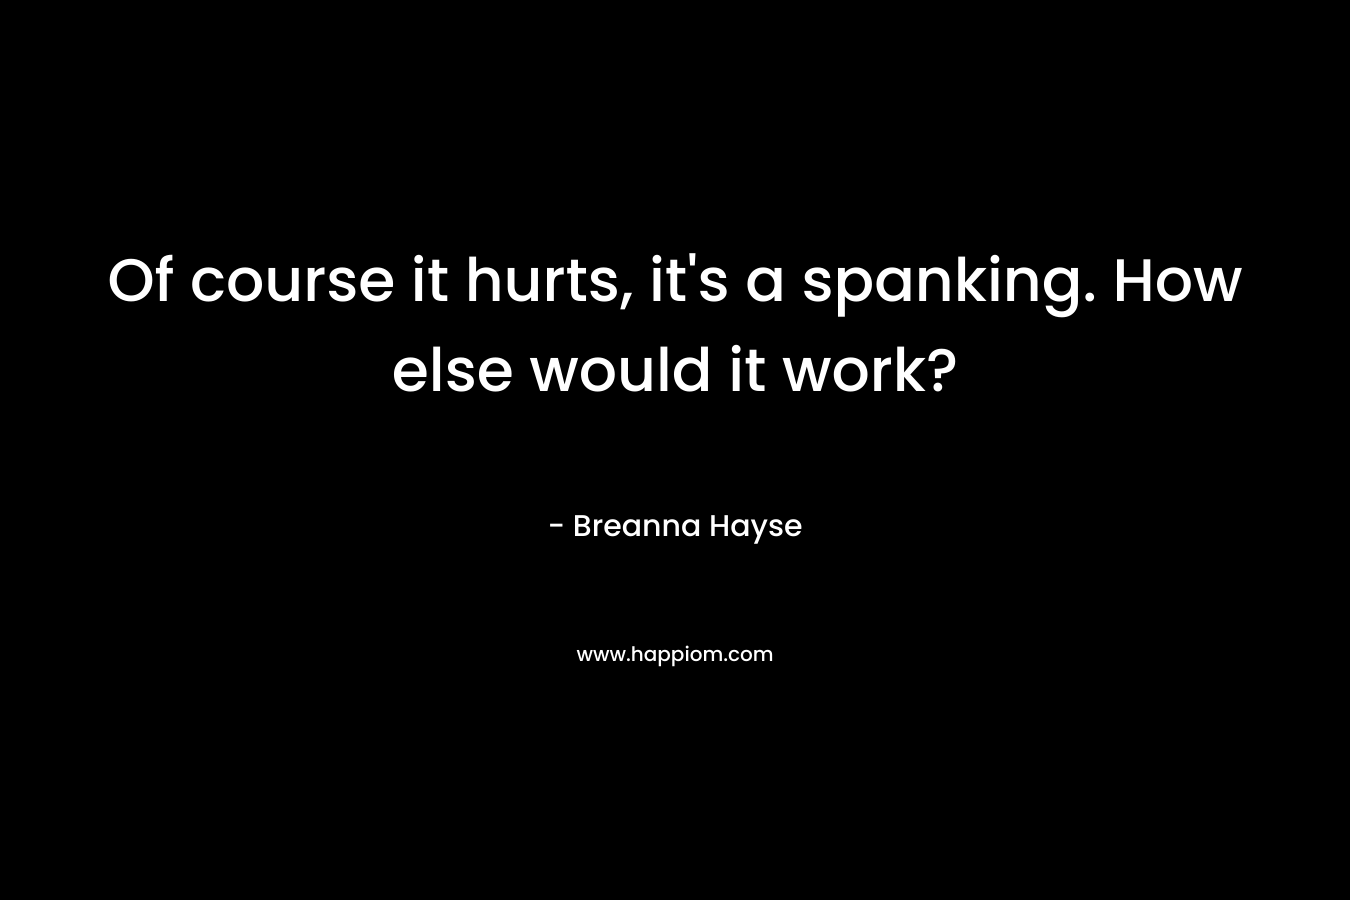 Of course it hurts, it's a spanking. How else would it work?